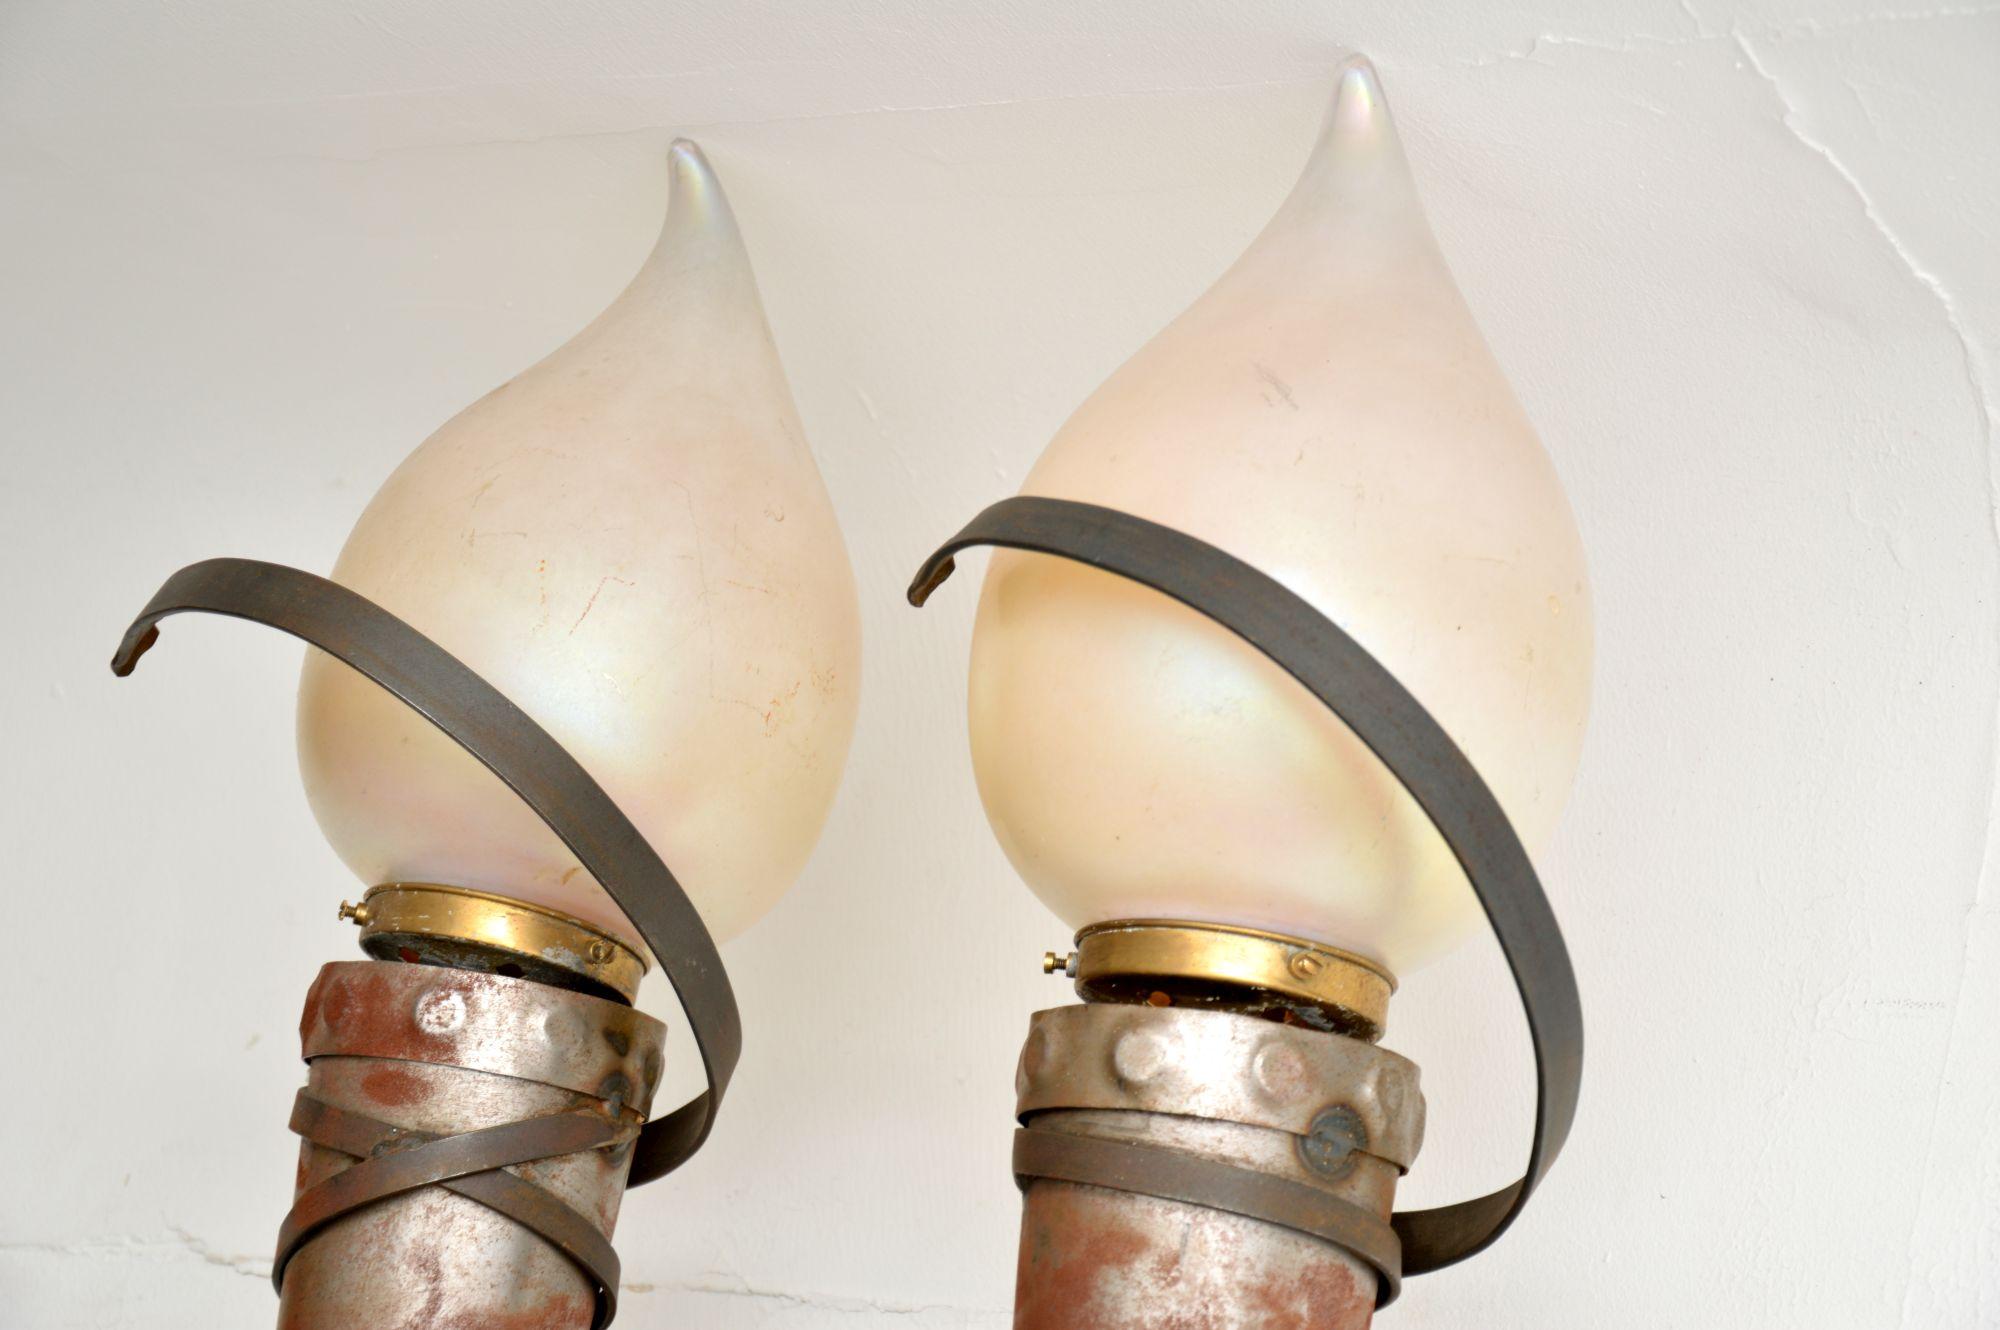 English Pair of Art Deco Steel, Copper and Glass Wall Sconce Lamps